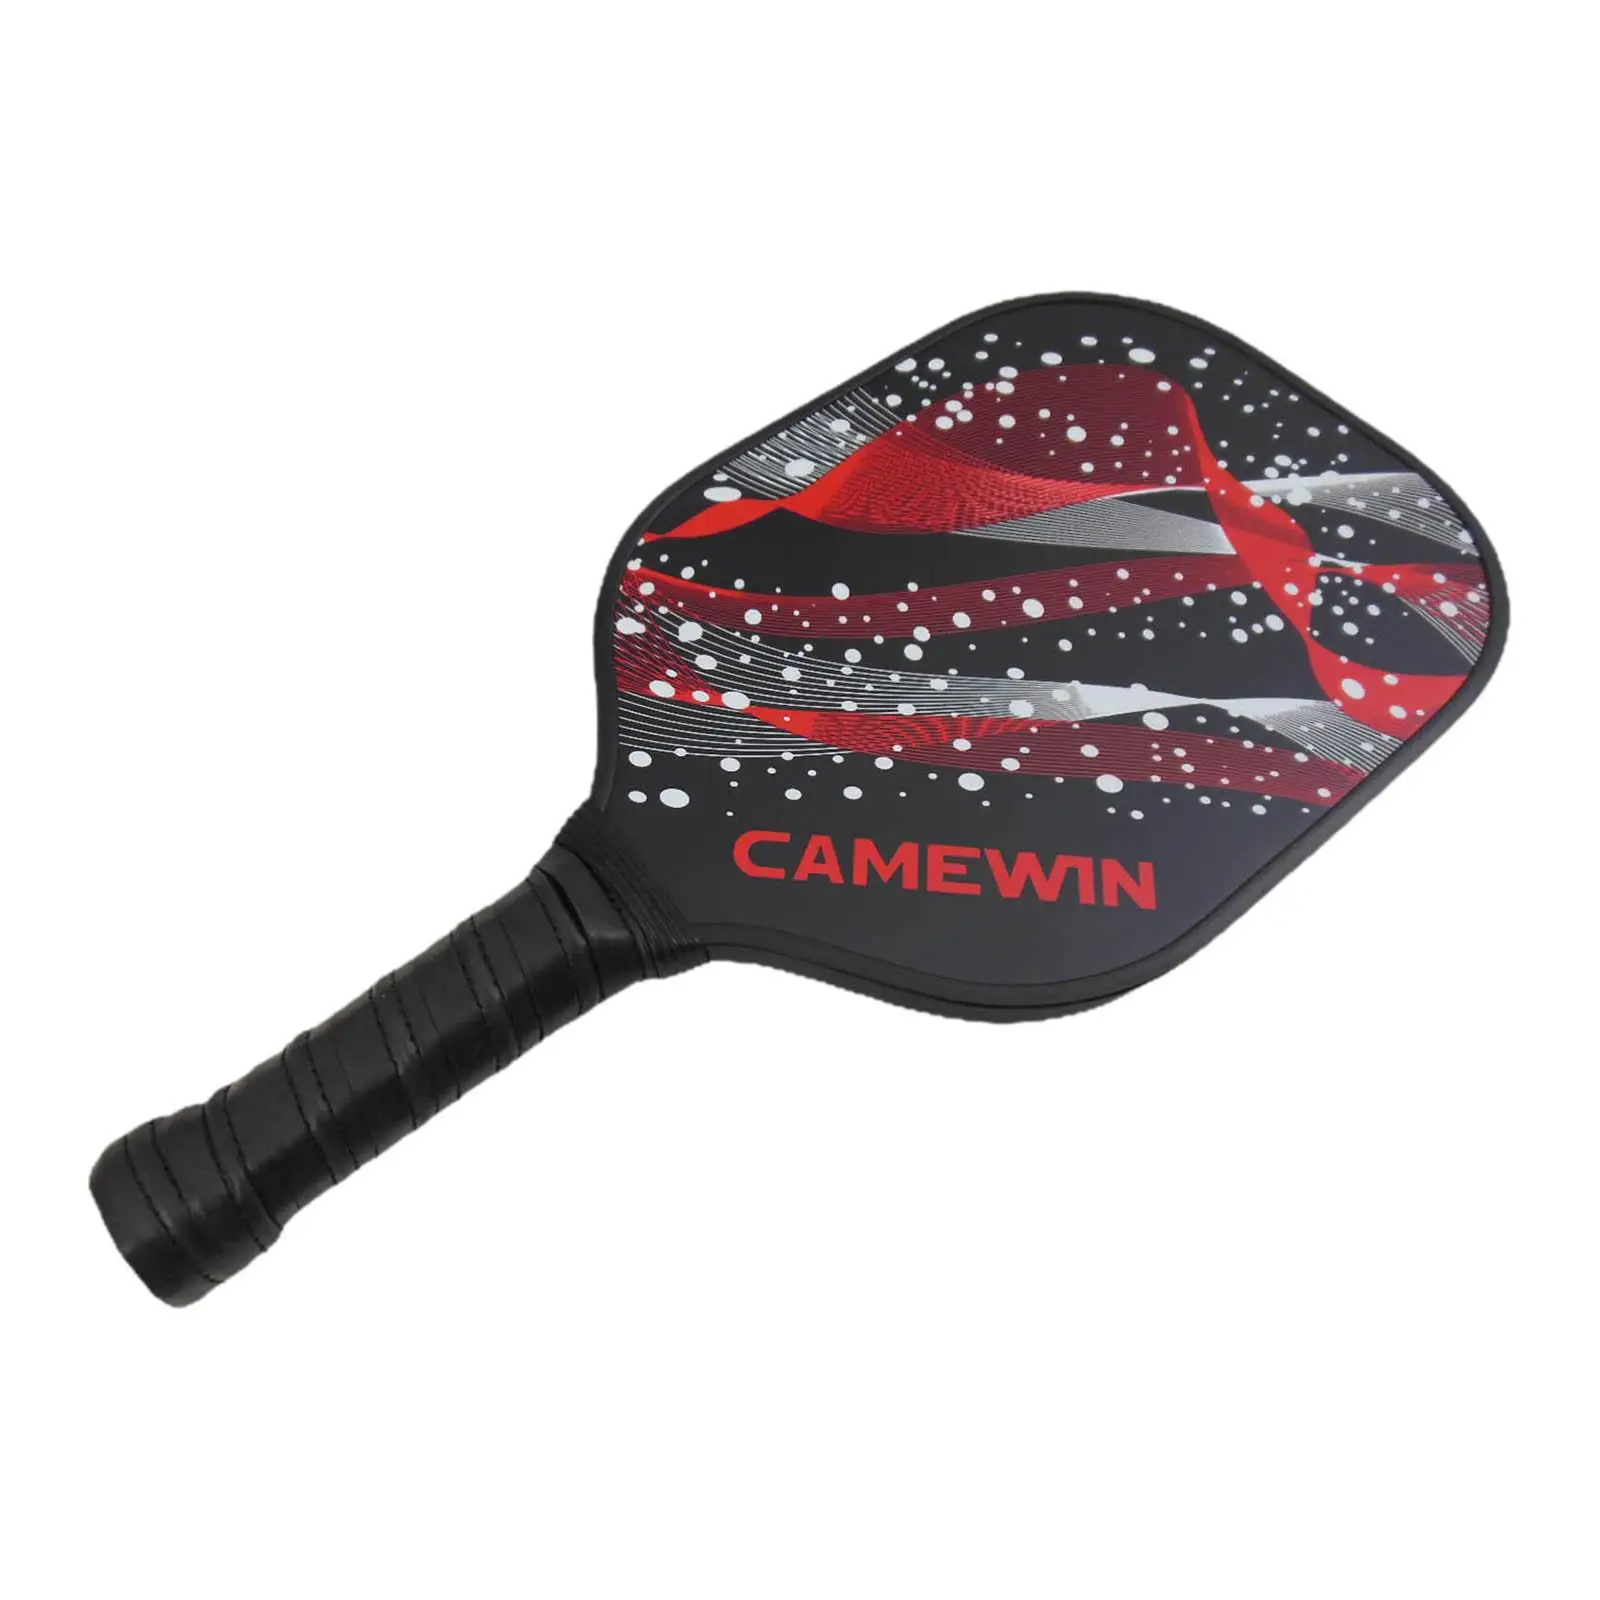 Paddle Carbon Fiber Surface Protable Racket for Badminton Table Tennis Training Outdoor